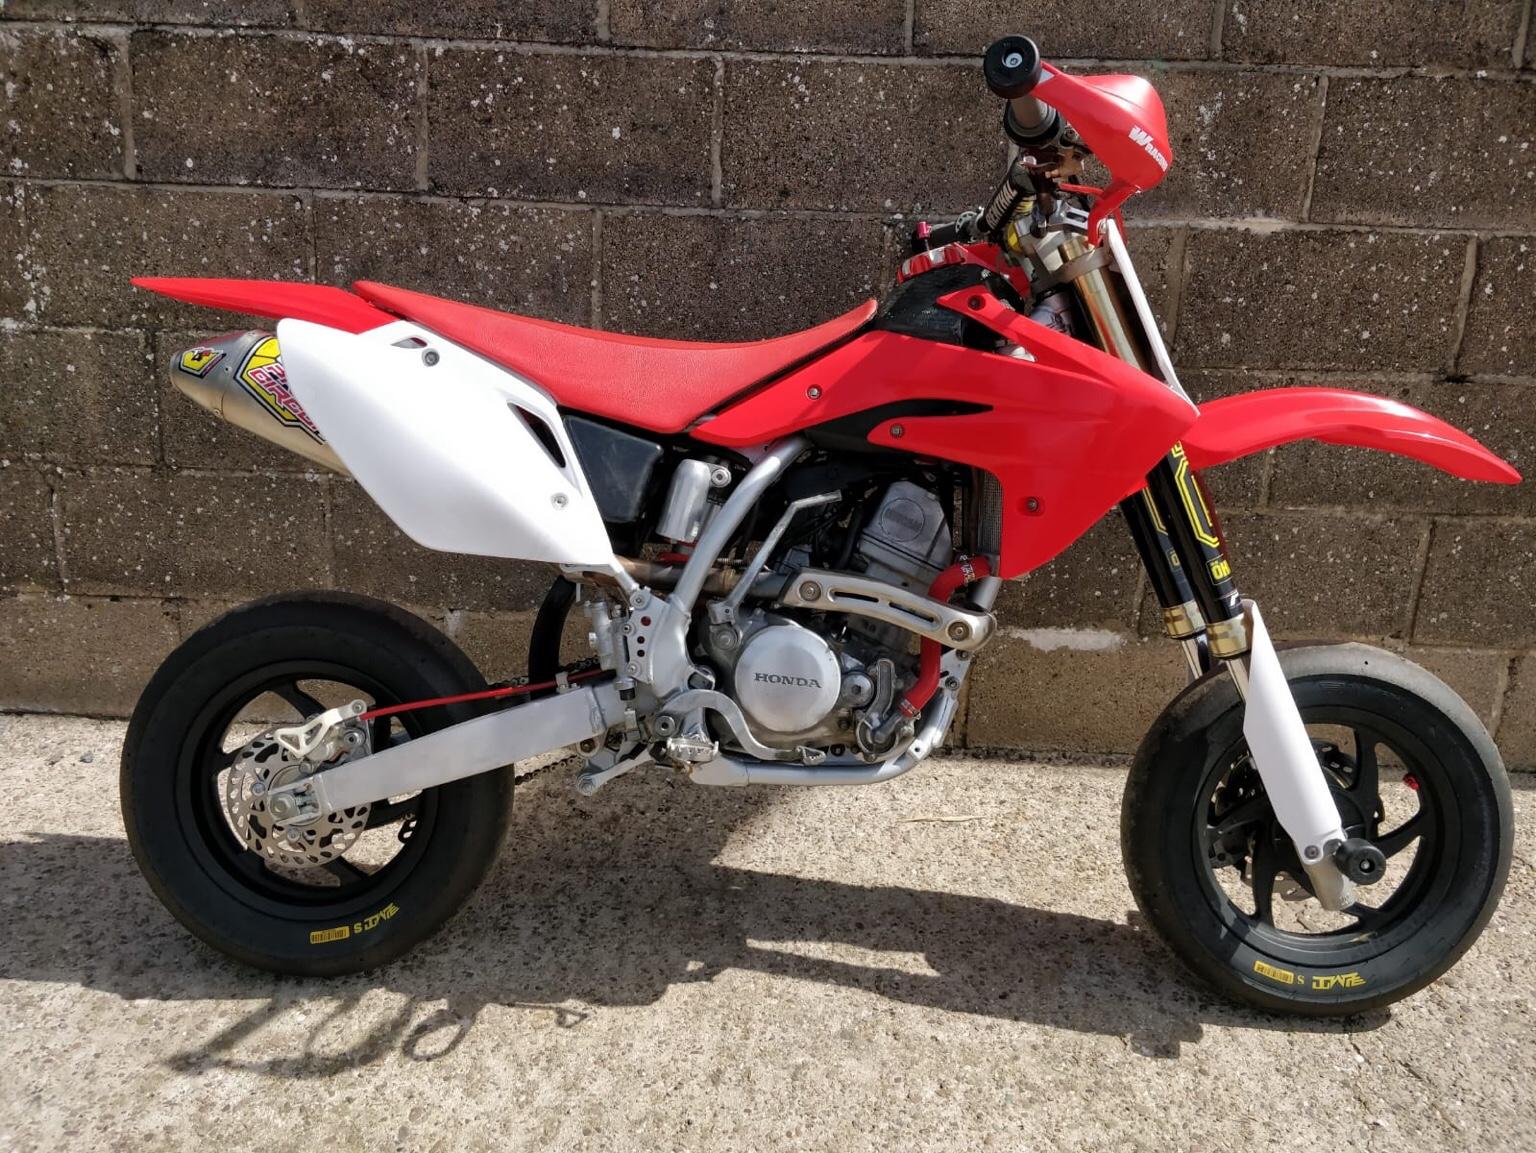 Honda CRF 150 Supermoto in South Derbyshire for £2,250.00